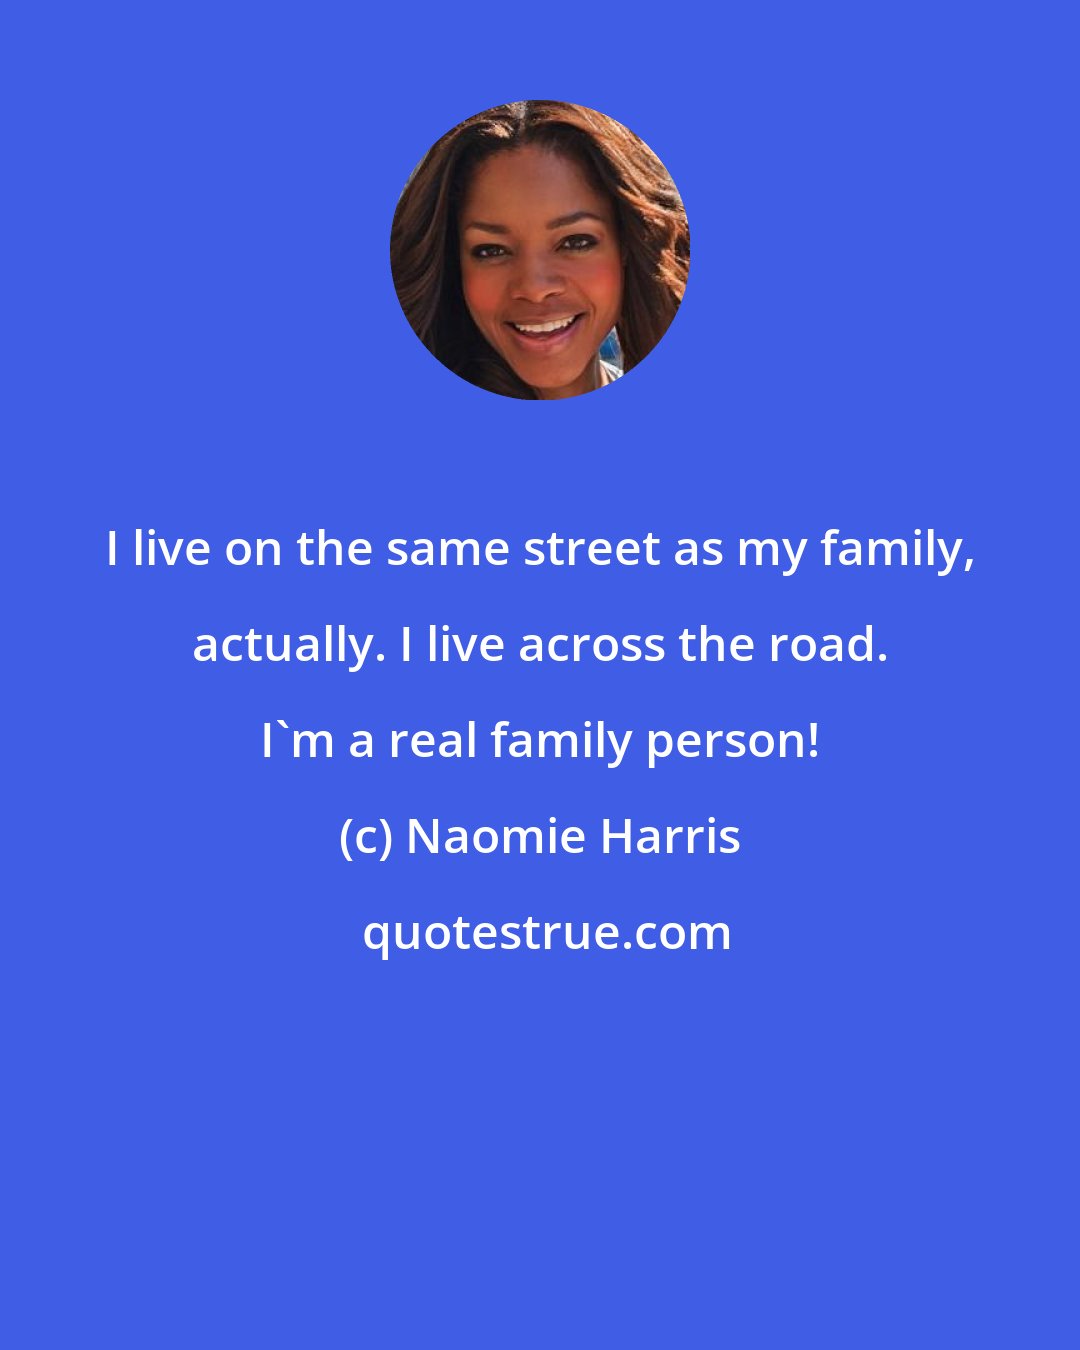 Naomie Harris: I live on the same street as my family, actually. I live across the road. I'm a real family person!